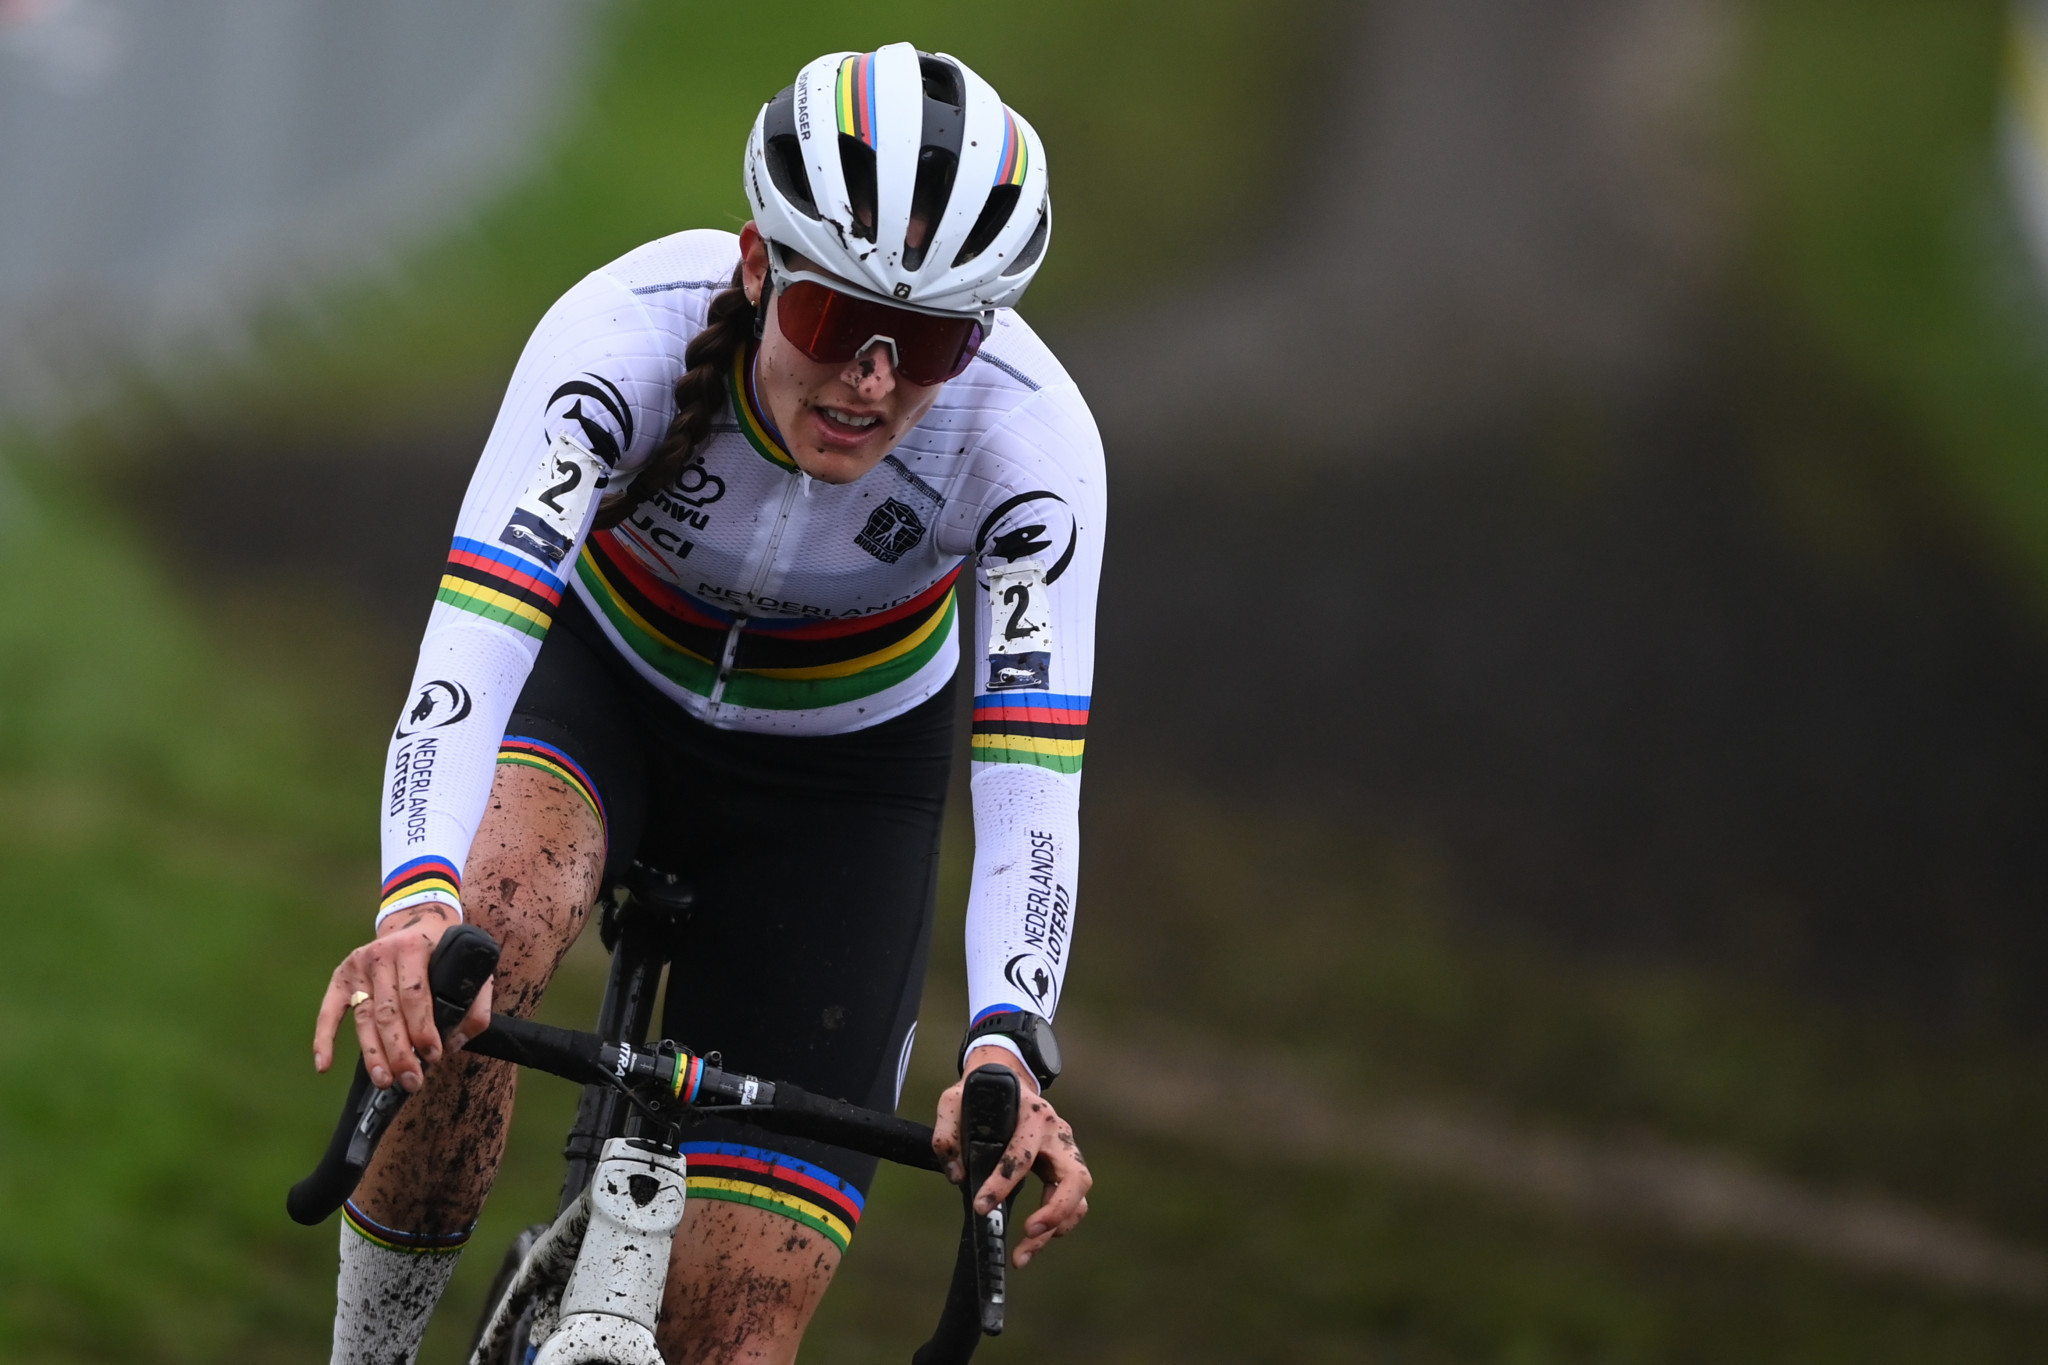 Brand earns third straight Cyclo-cross World Cup win in Hulst